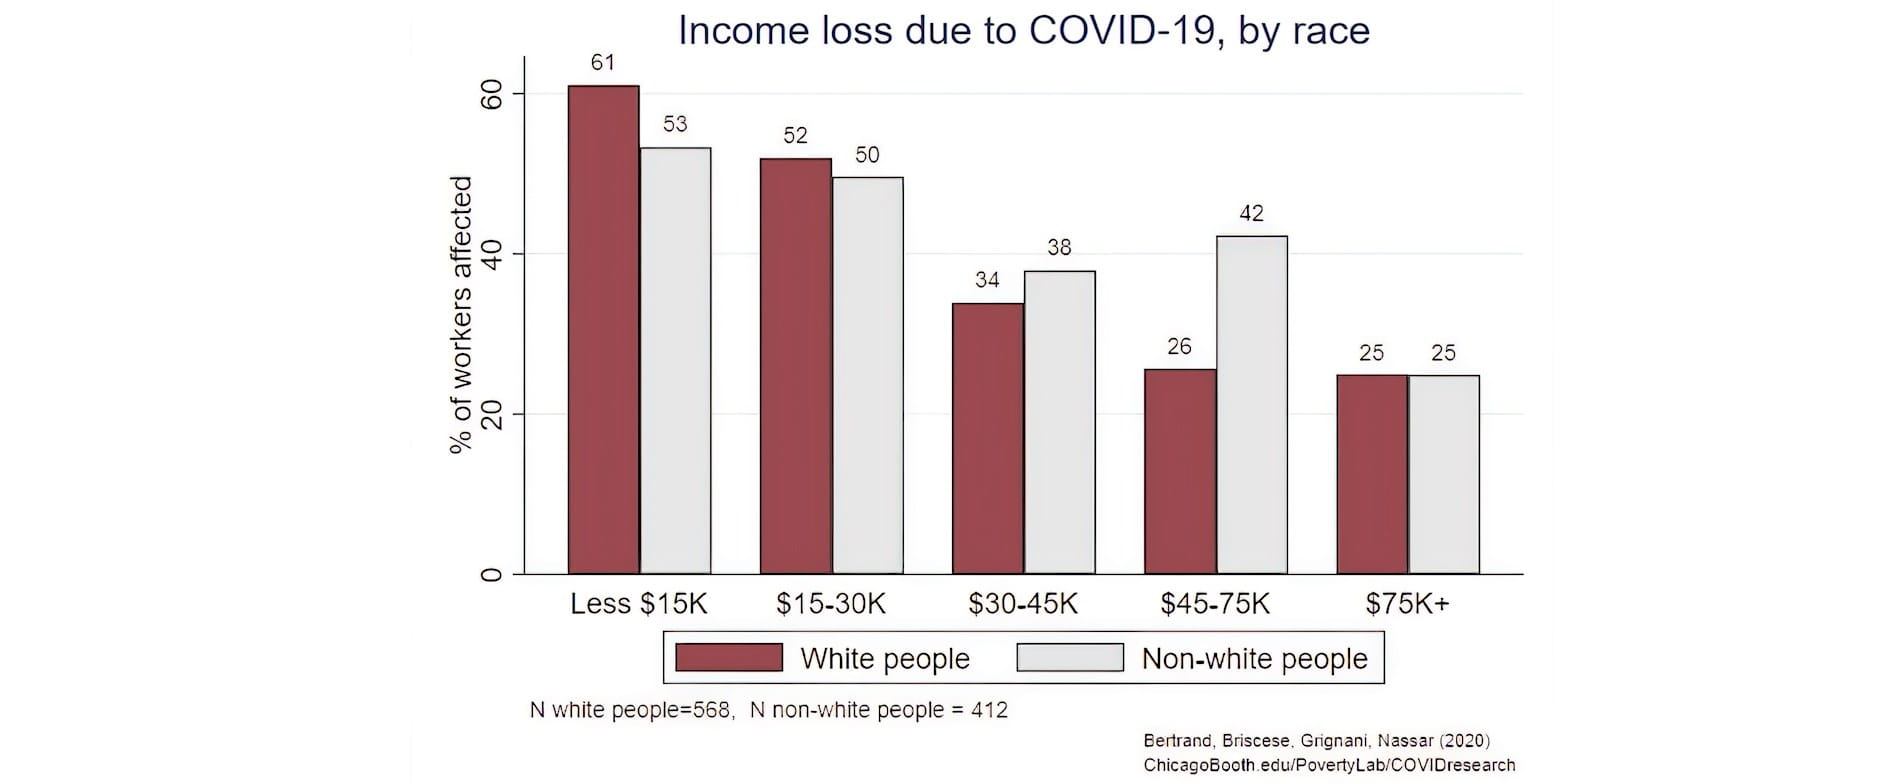 Finding 2 Vertical Bar Graph of Income loss due to COVID-19, by race